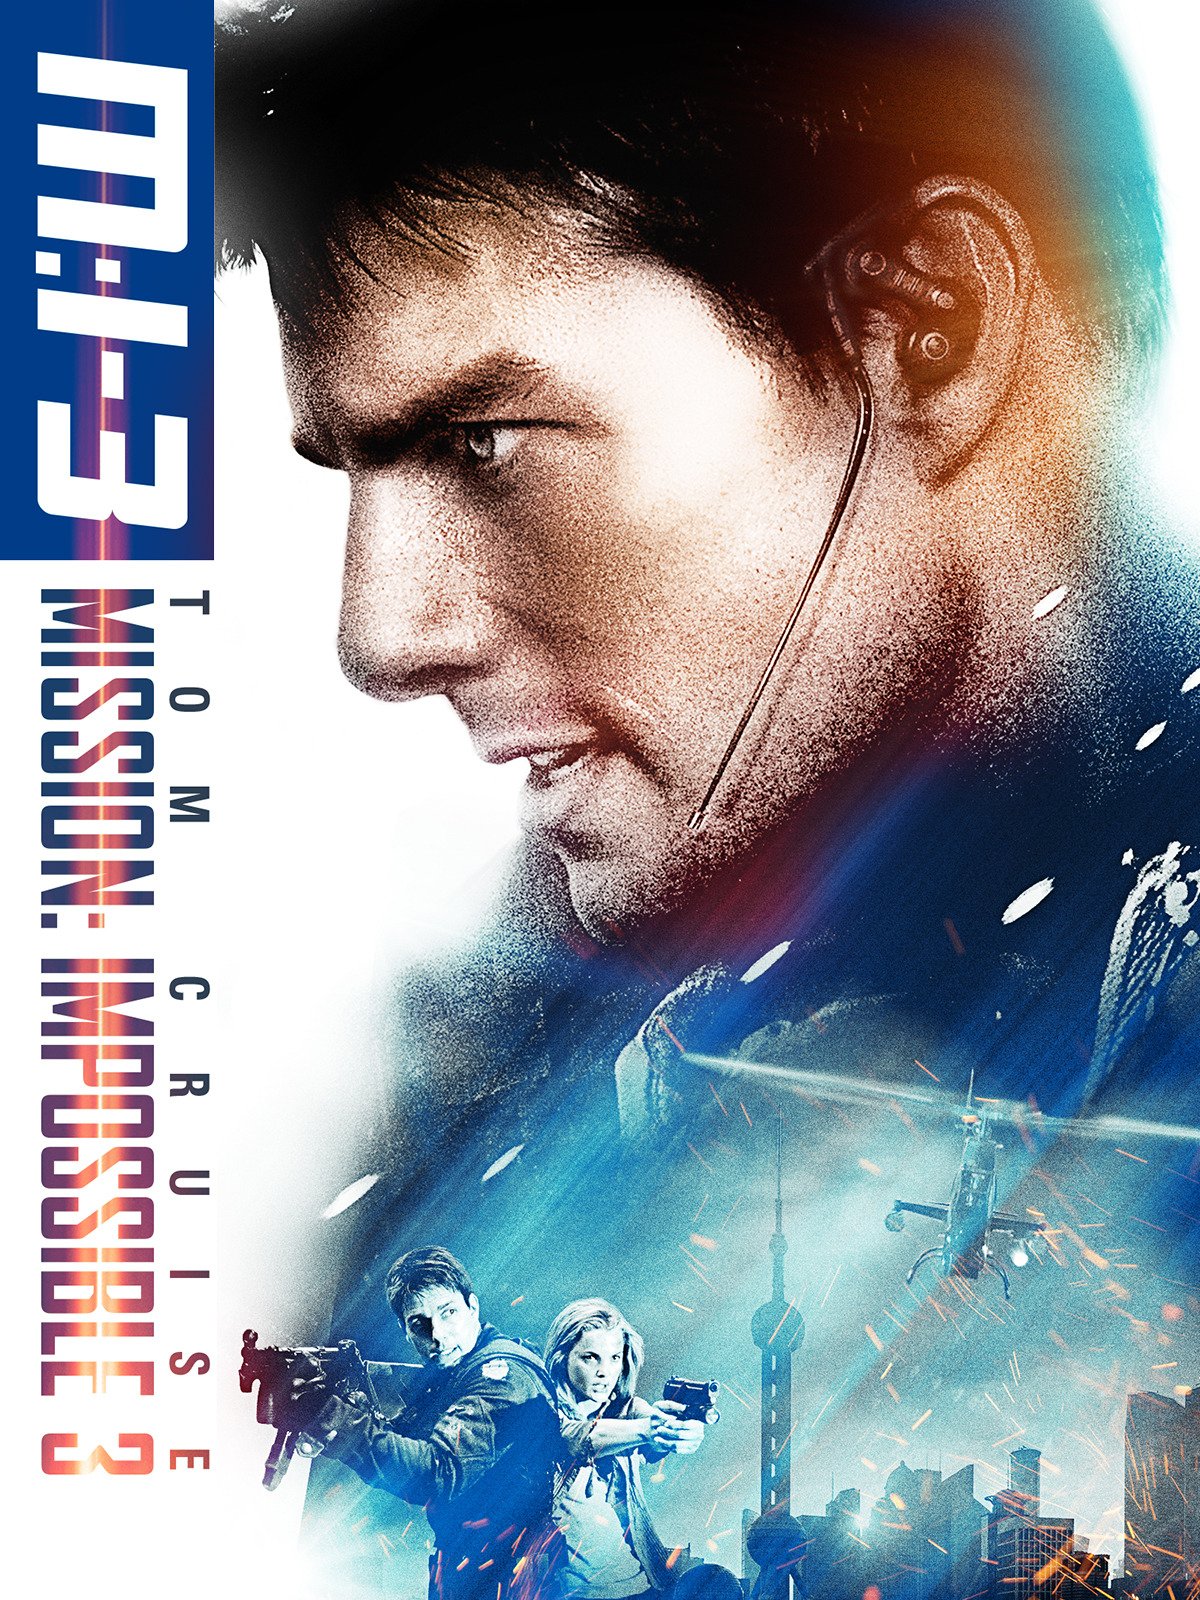 mission impossible 4 hindi download 720p